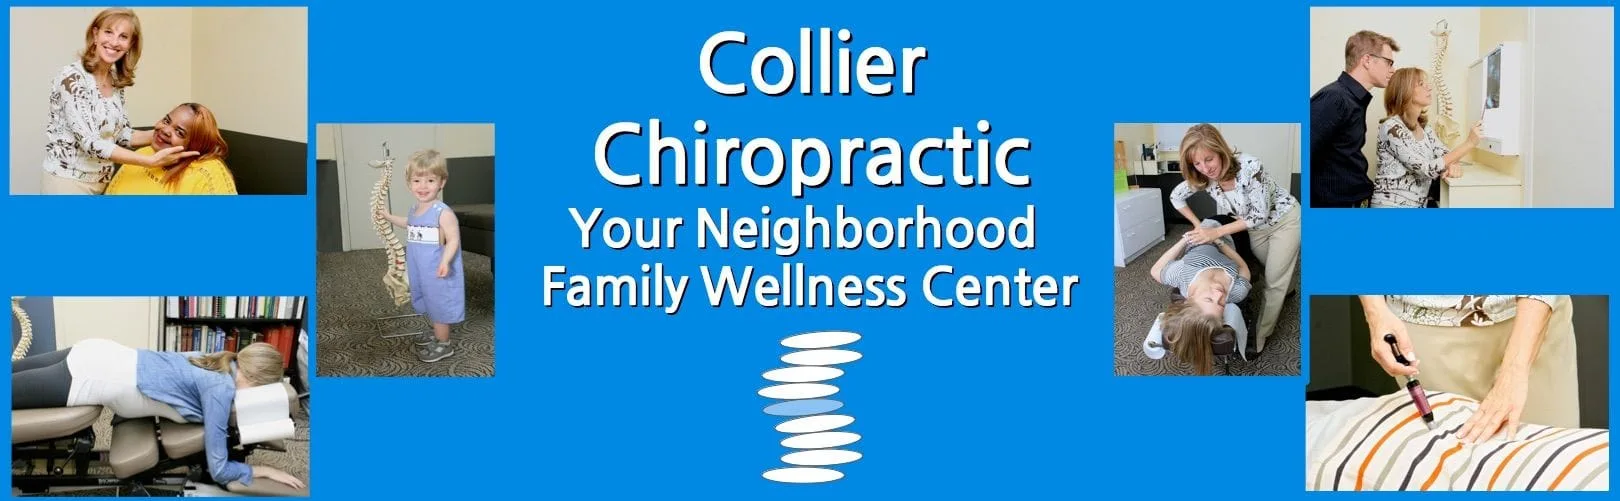 Collier Chiropractic